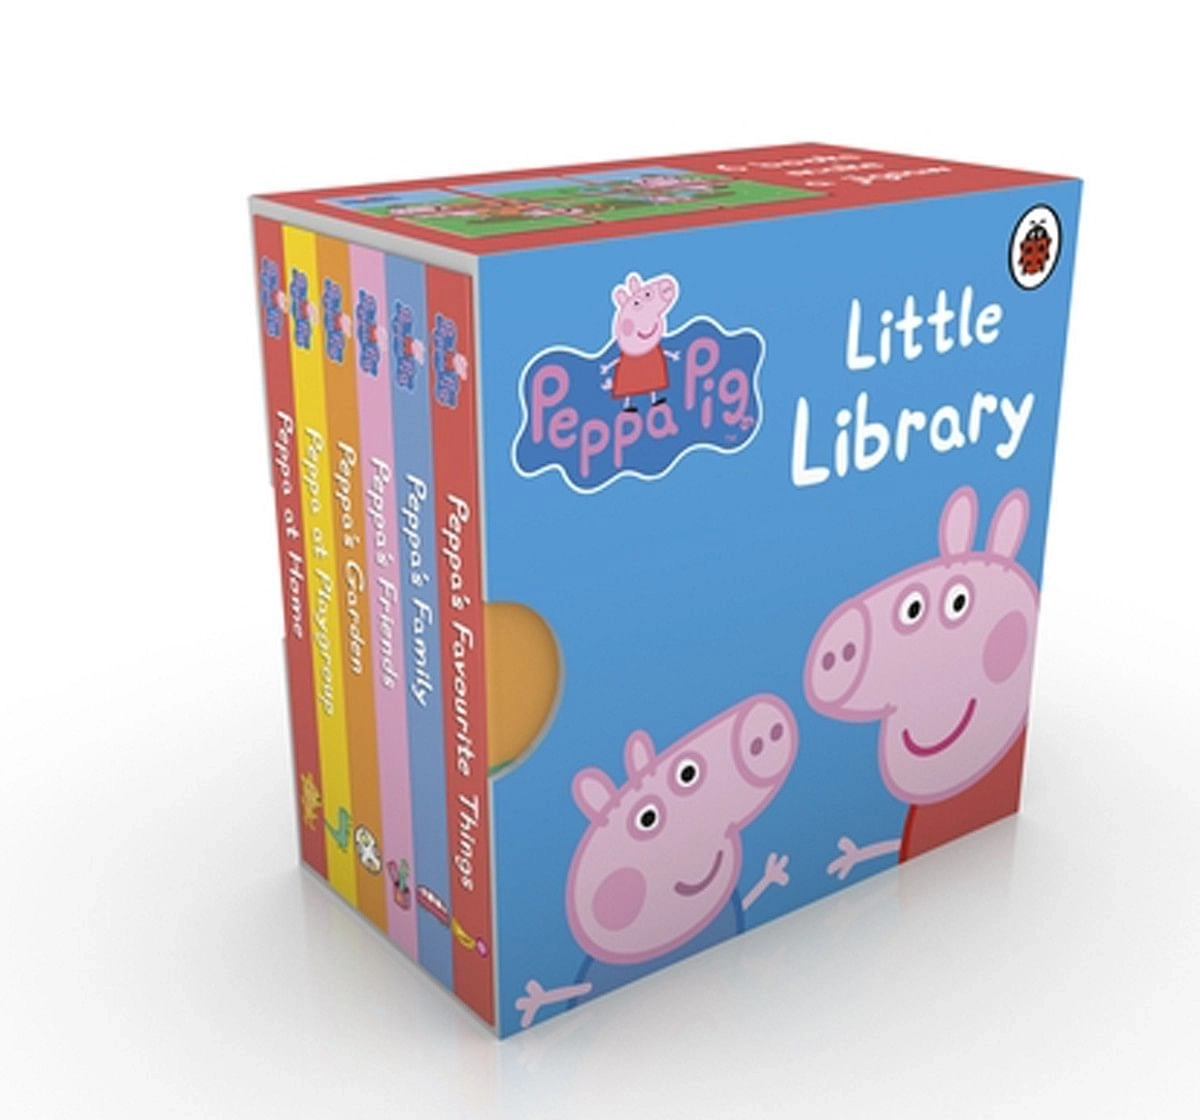 Penguin Peppa Pig Little Library Soft Cover Multicolour 3Y+